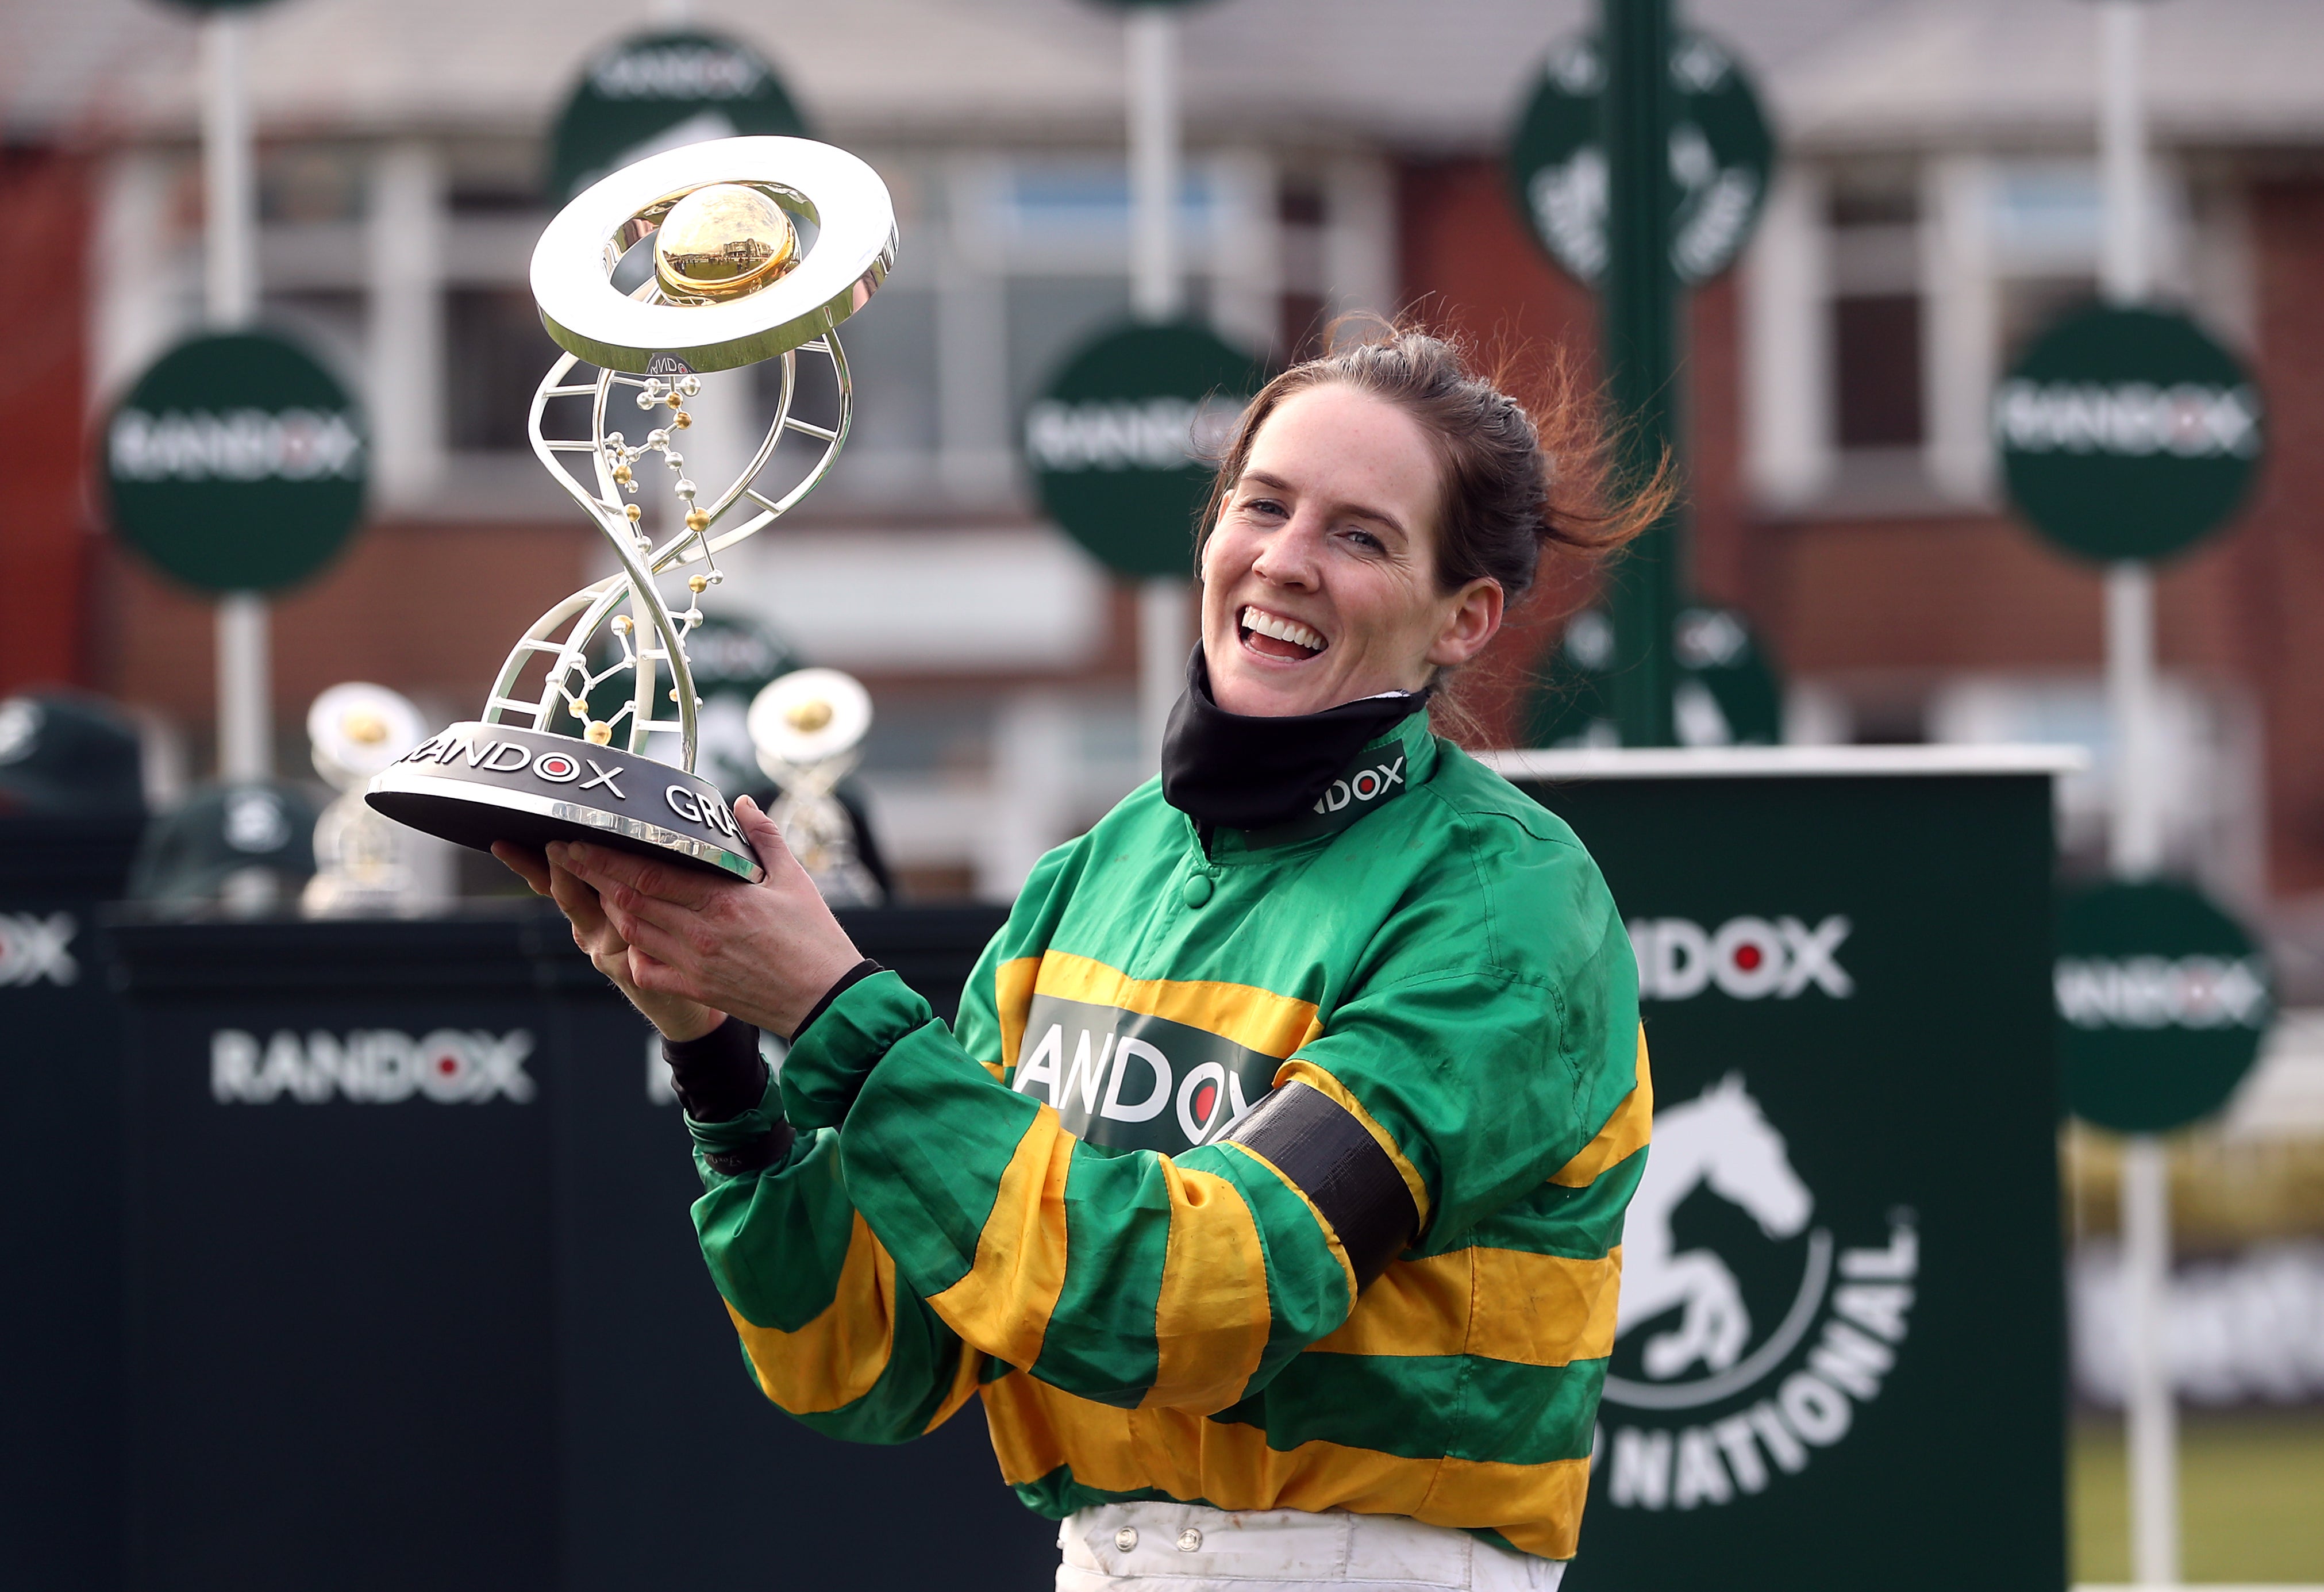 Jockey Rachael Blackmore receives the Randox Grand National Handicap Chase trophy after winning on Minella Times at Aintree Racecourse, Liverpool (David Davies/PA)